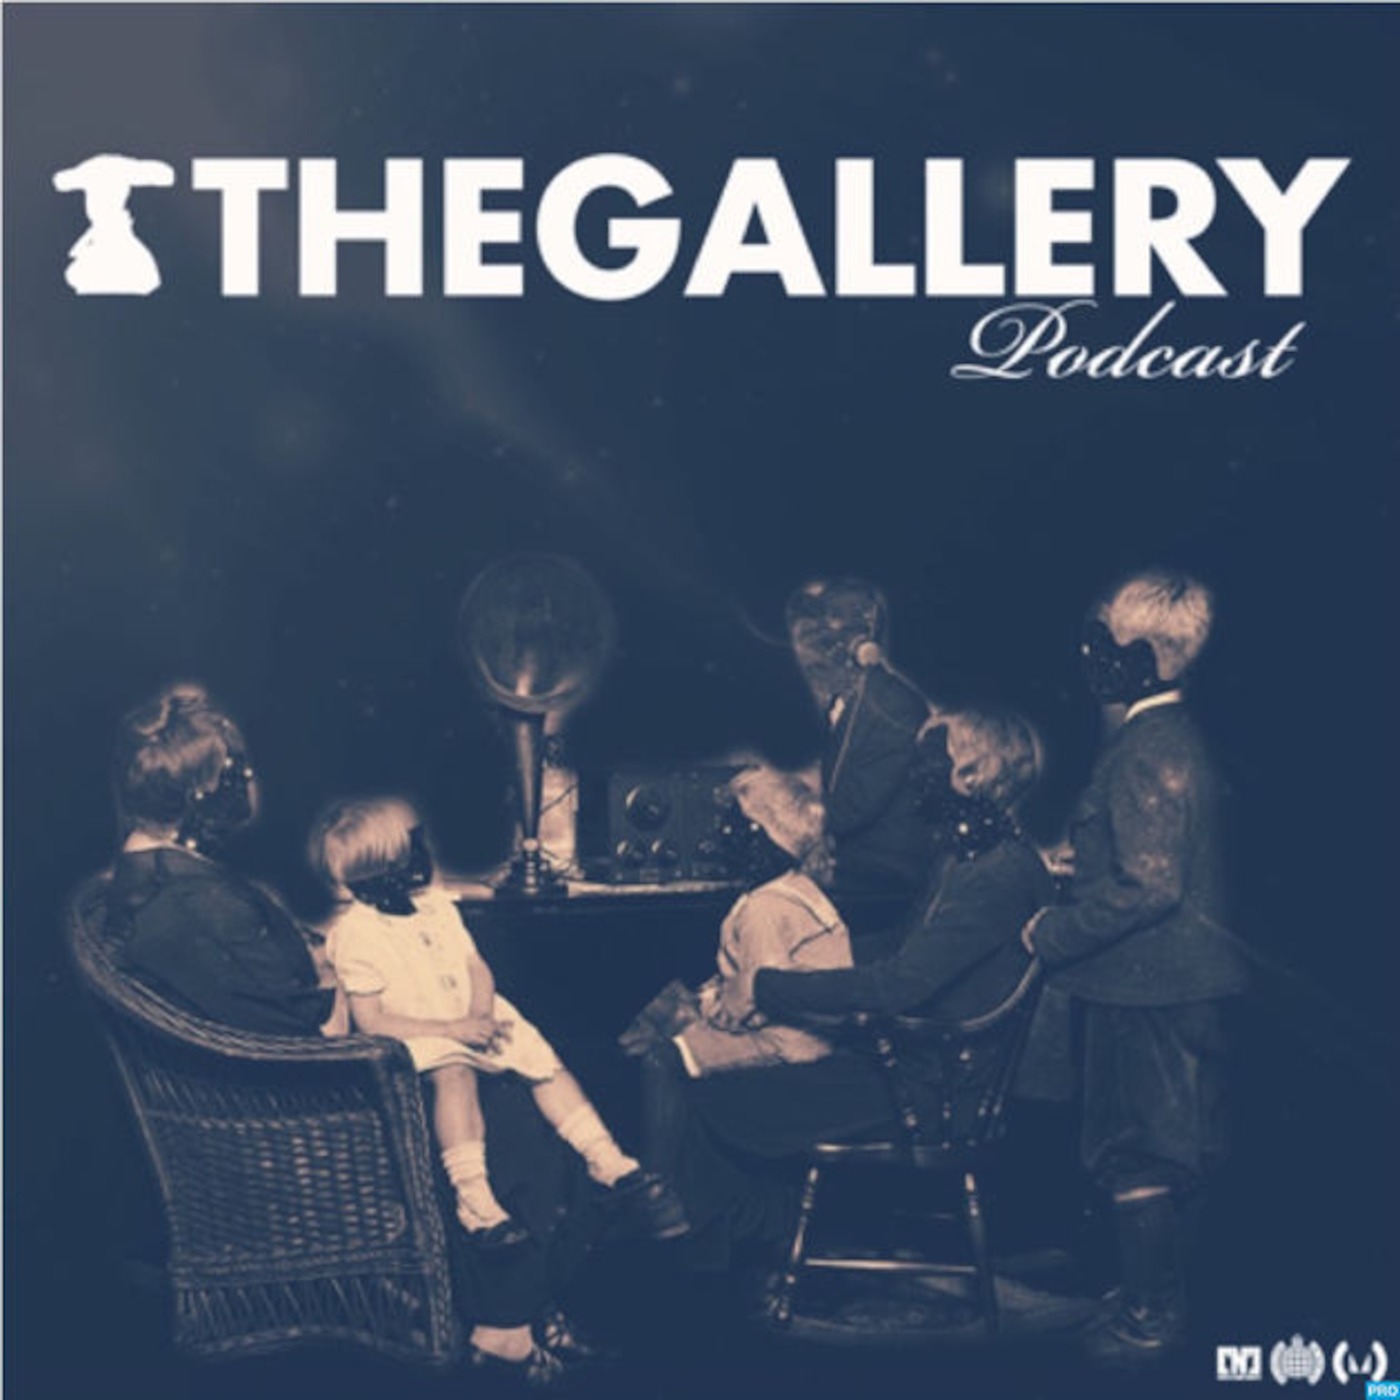 The Gallery Podcast Episode 179 W/ Tristan D + John 00 Fleming Guest Mix